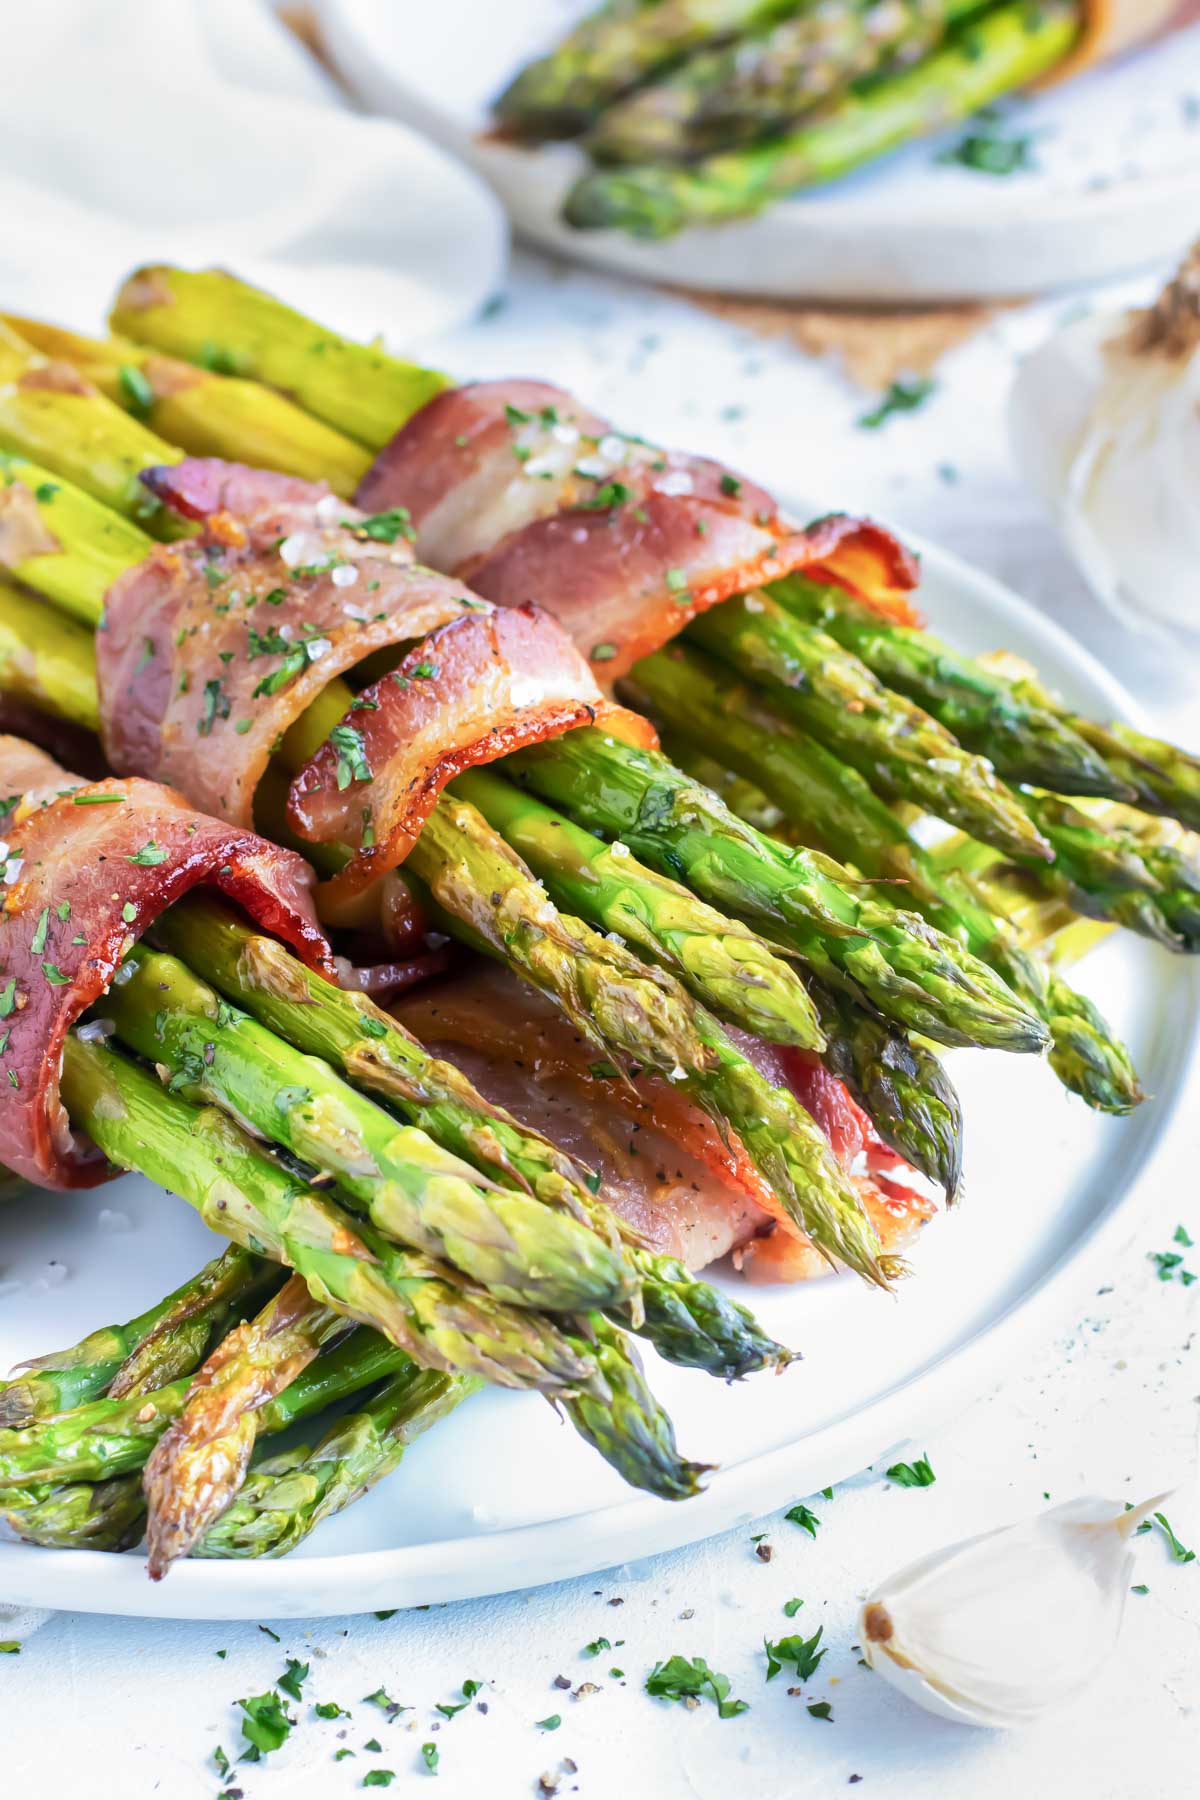 Bacon Wrapped Asparagus bundles on a white plate.